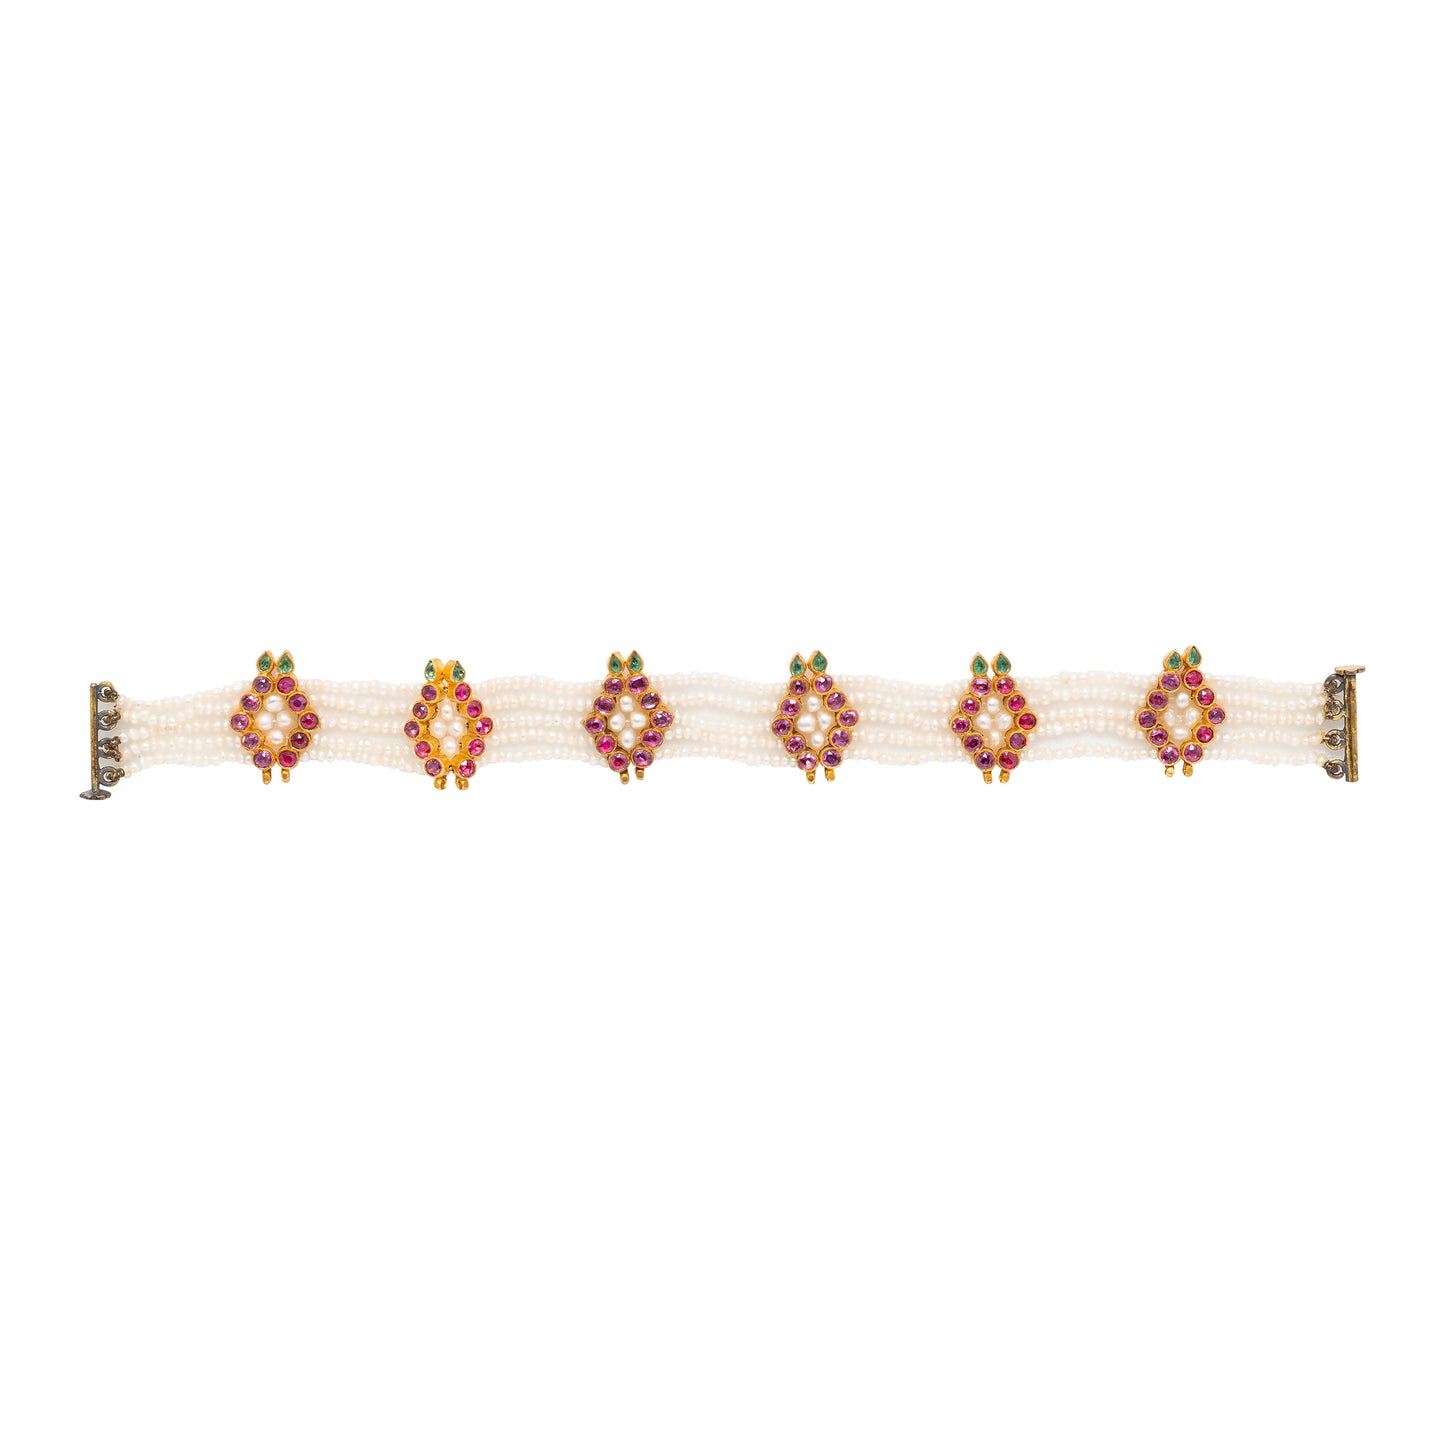 Bracelet with Rubies, Emeralds and Pearls in 22k Gold.